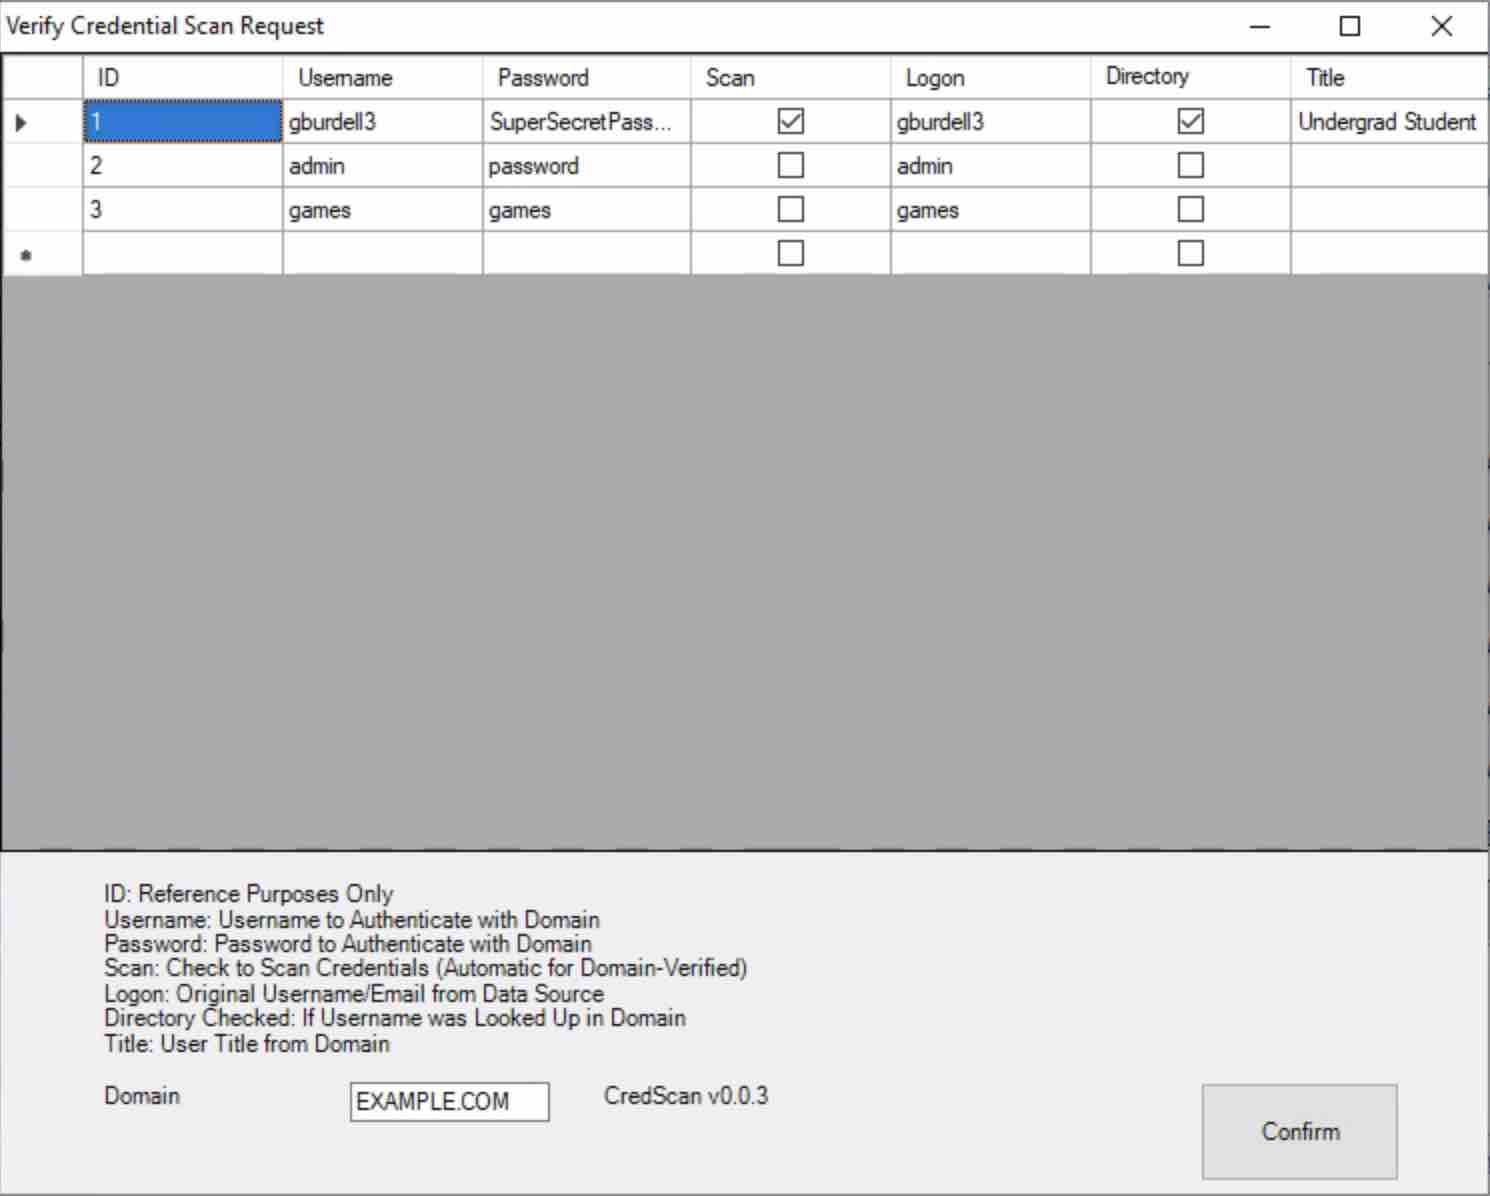 Graphical Interface with a Table of Usernames and Passwords